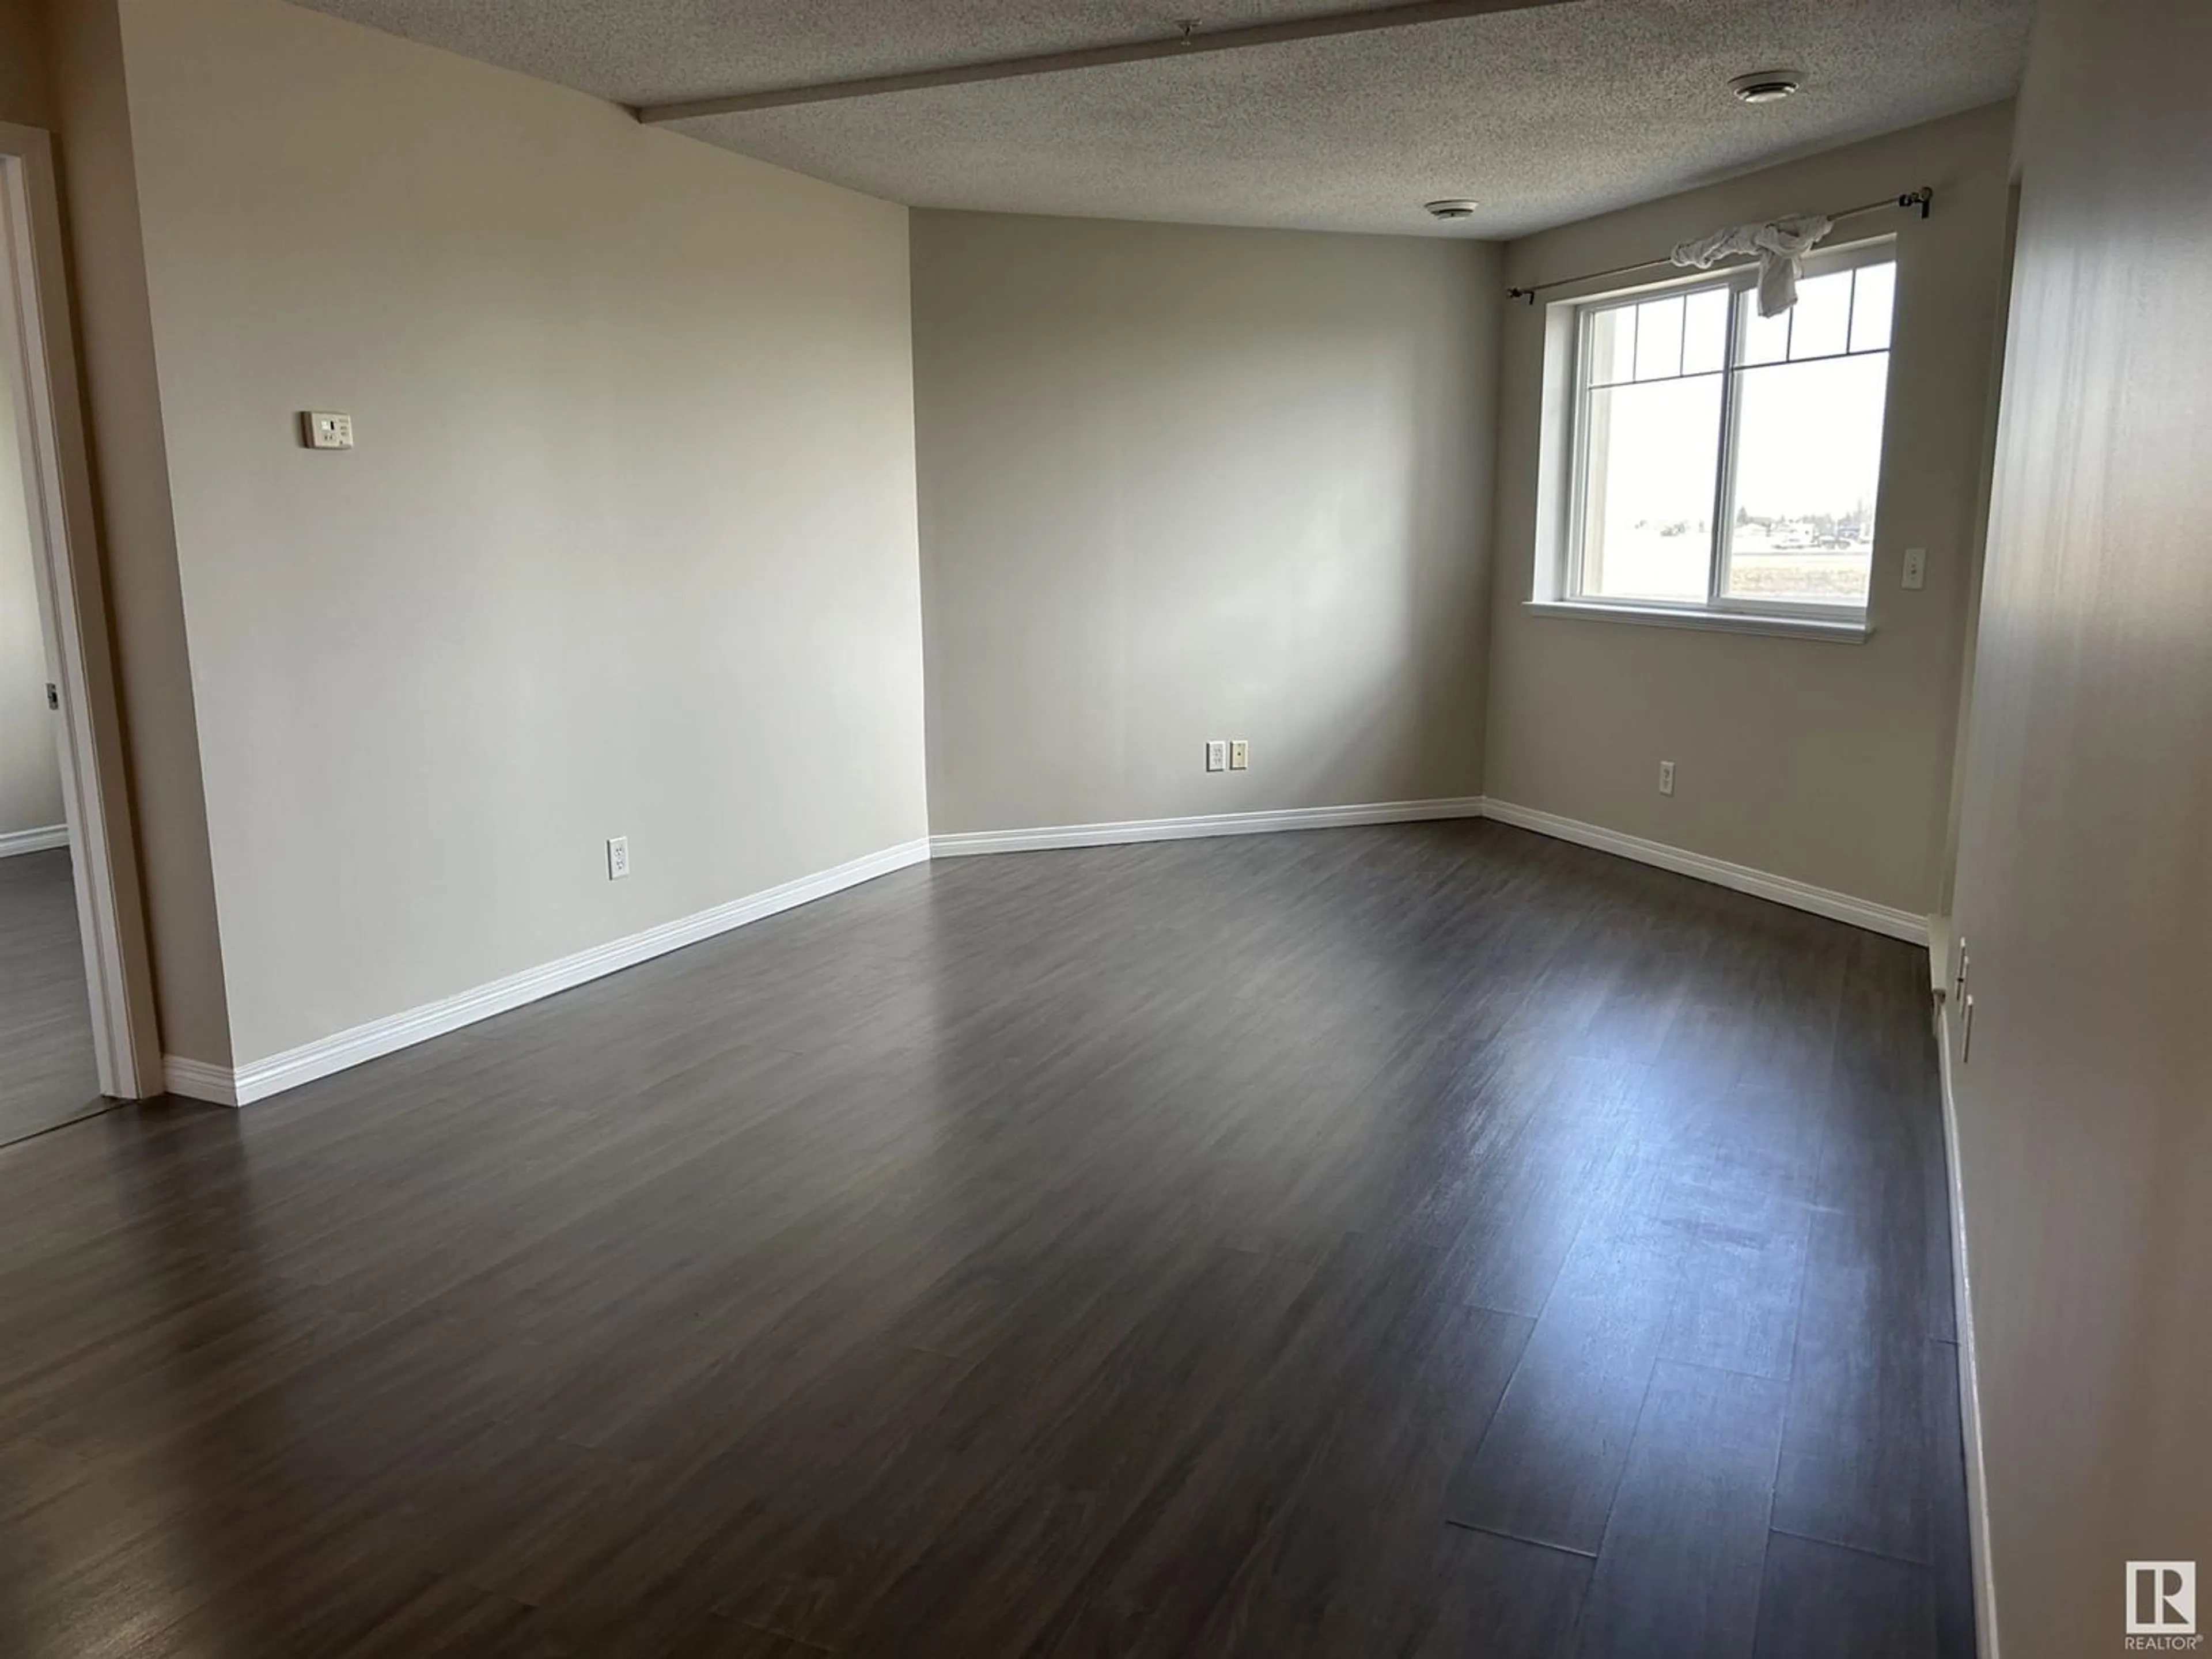 A pic of a room for #210 6925 199 ST NW, Edmonton Alberta T5T3X8